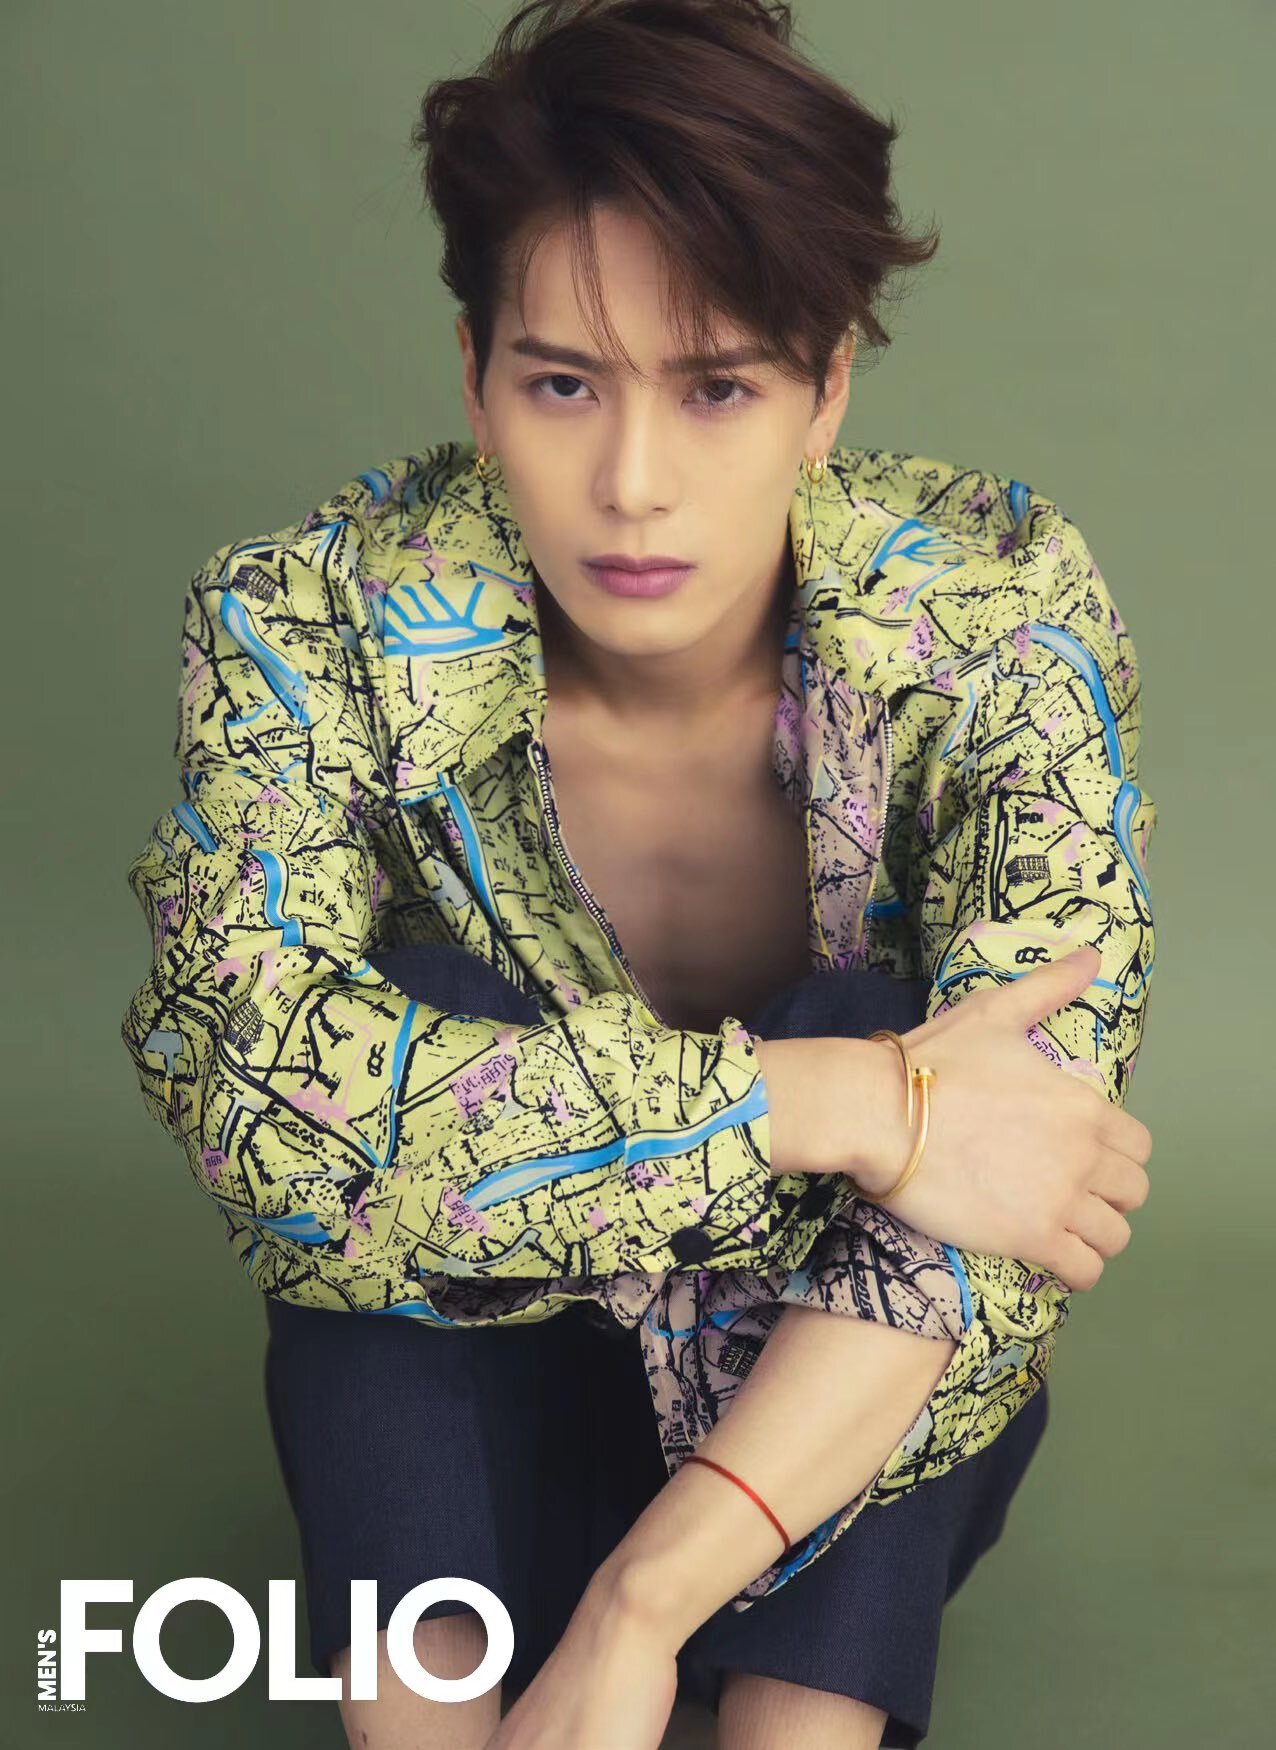 Jackson Wang is the new face of Fendi in China - Men's Folio Malaysia